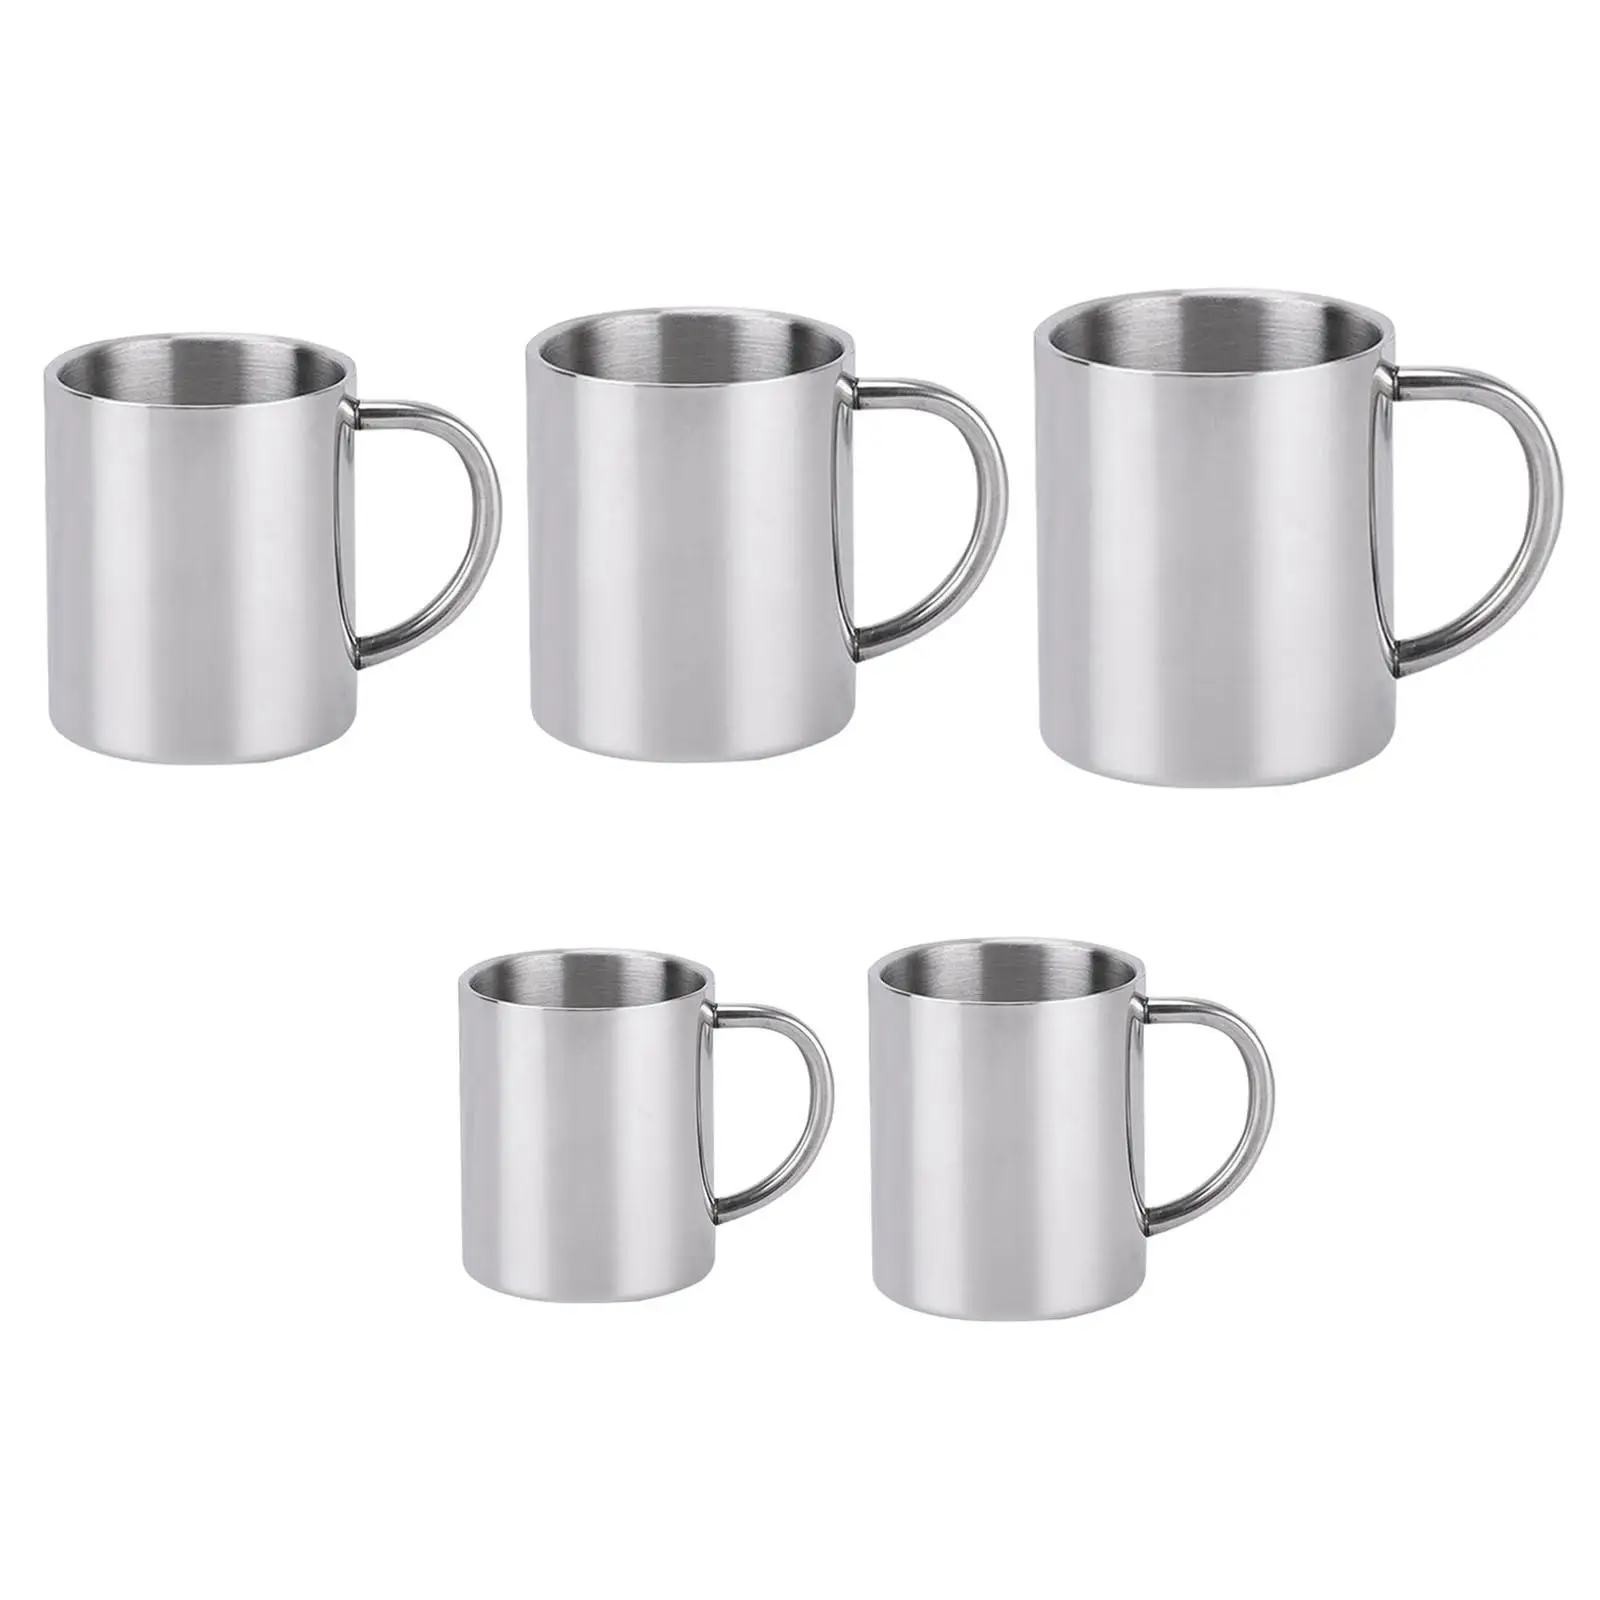 Stainless Steel Coffee Mug Double Wall Anti Scalding Beer Mug Juice Drinking Cup for Hot or Cold Drinks Travel Camping Outdoor